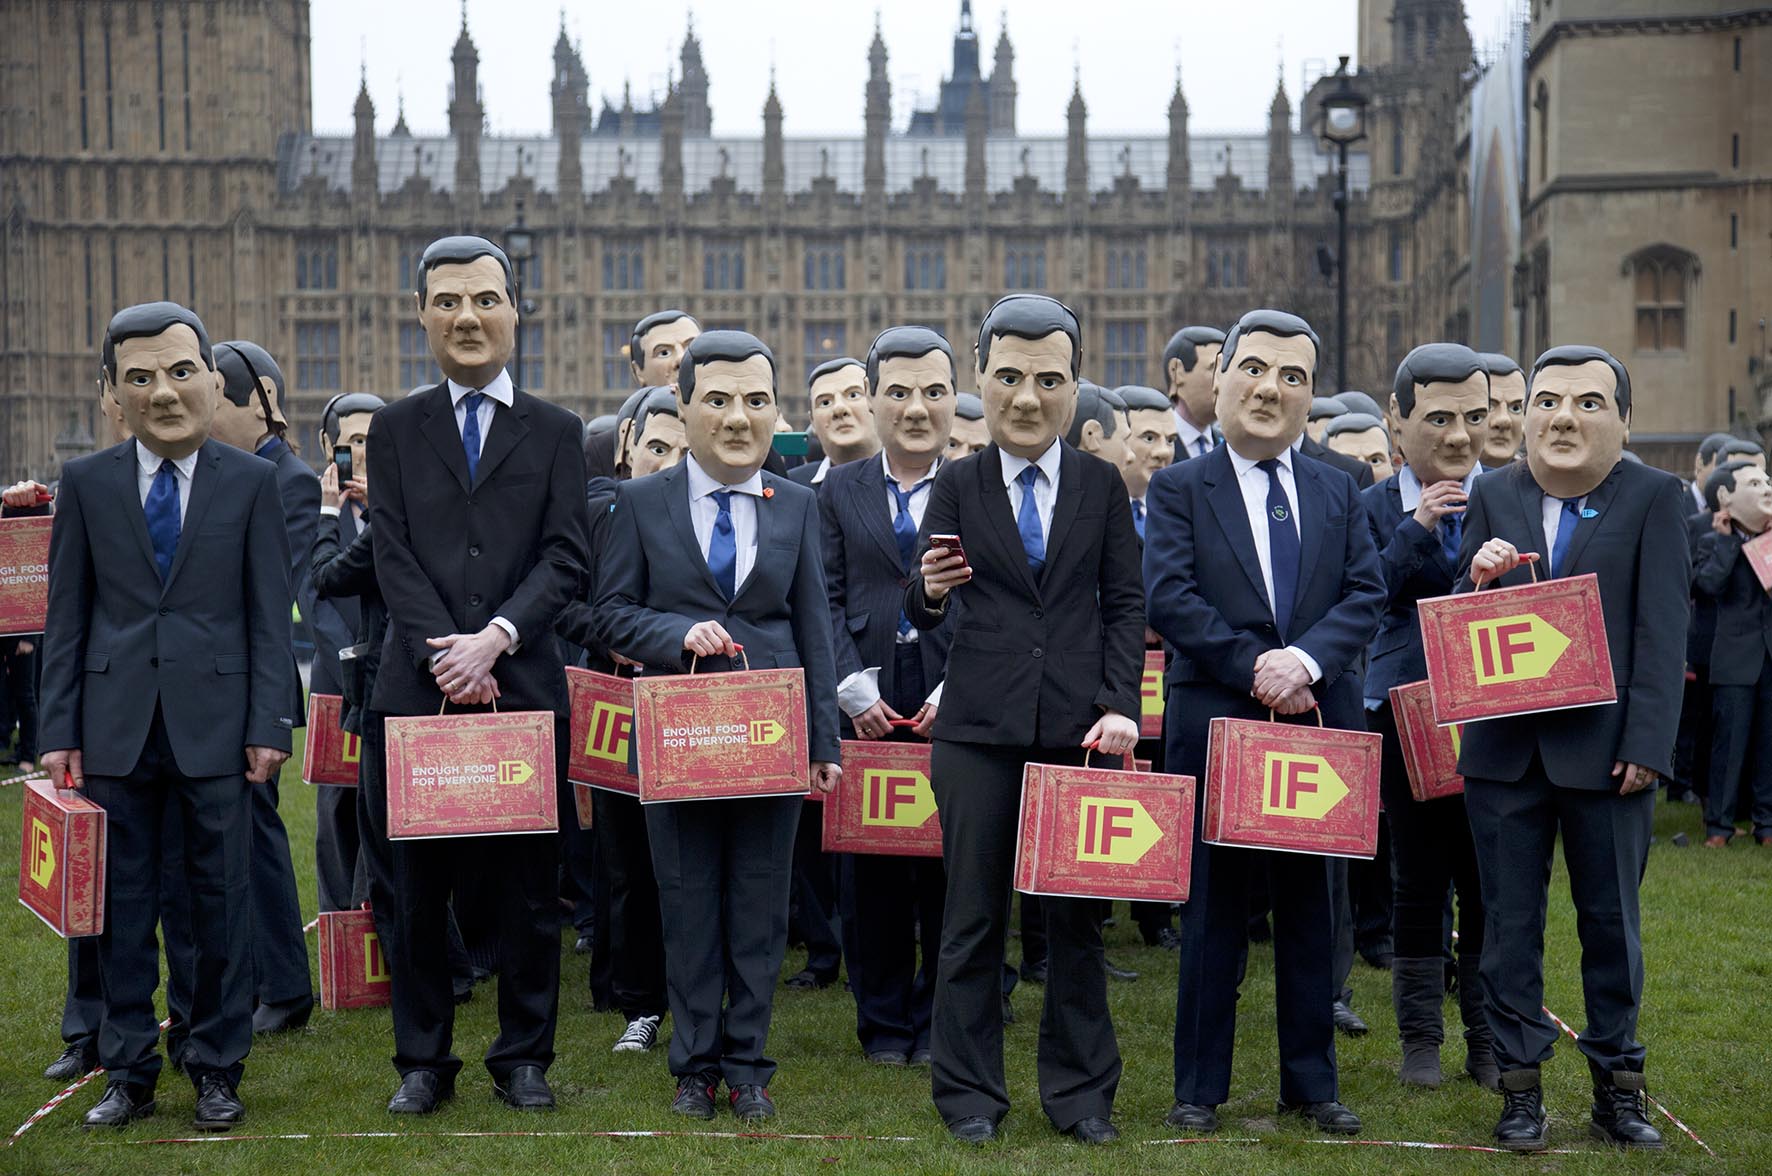  IF Campaign activists dressed as George Osborne gather in Westminster to remind the Chancellor to uphold aid promises and end tax dodging. 